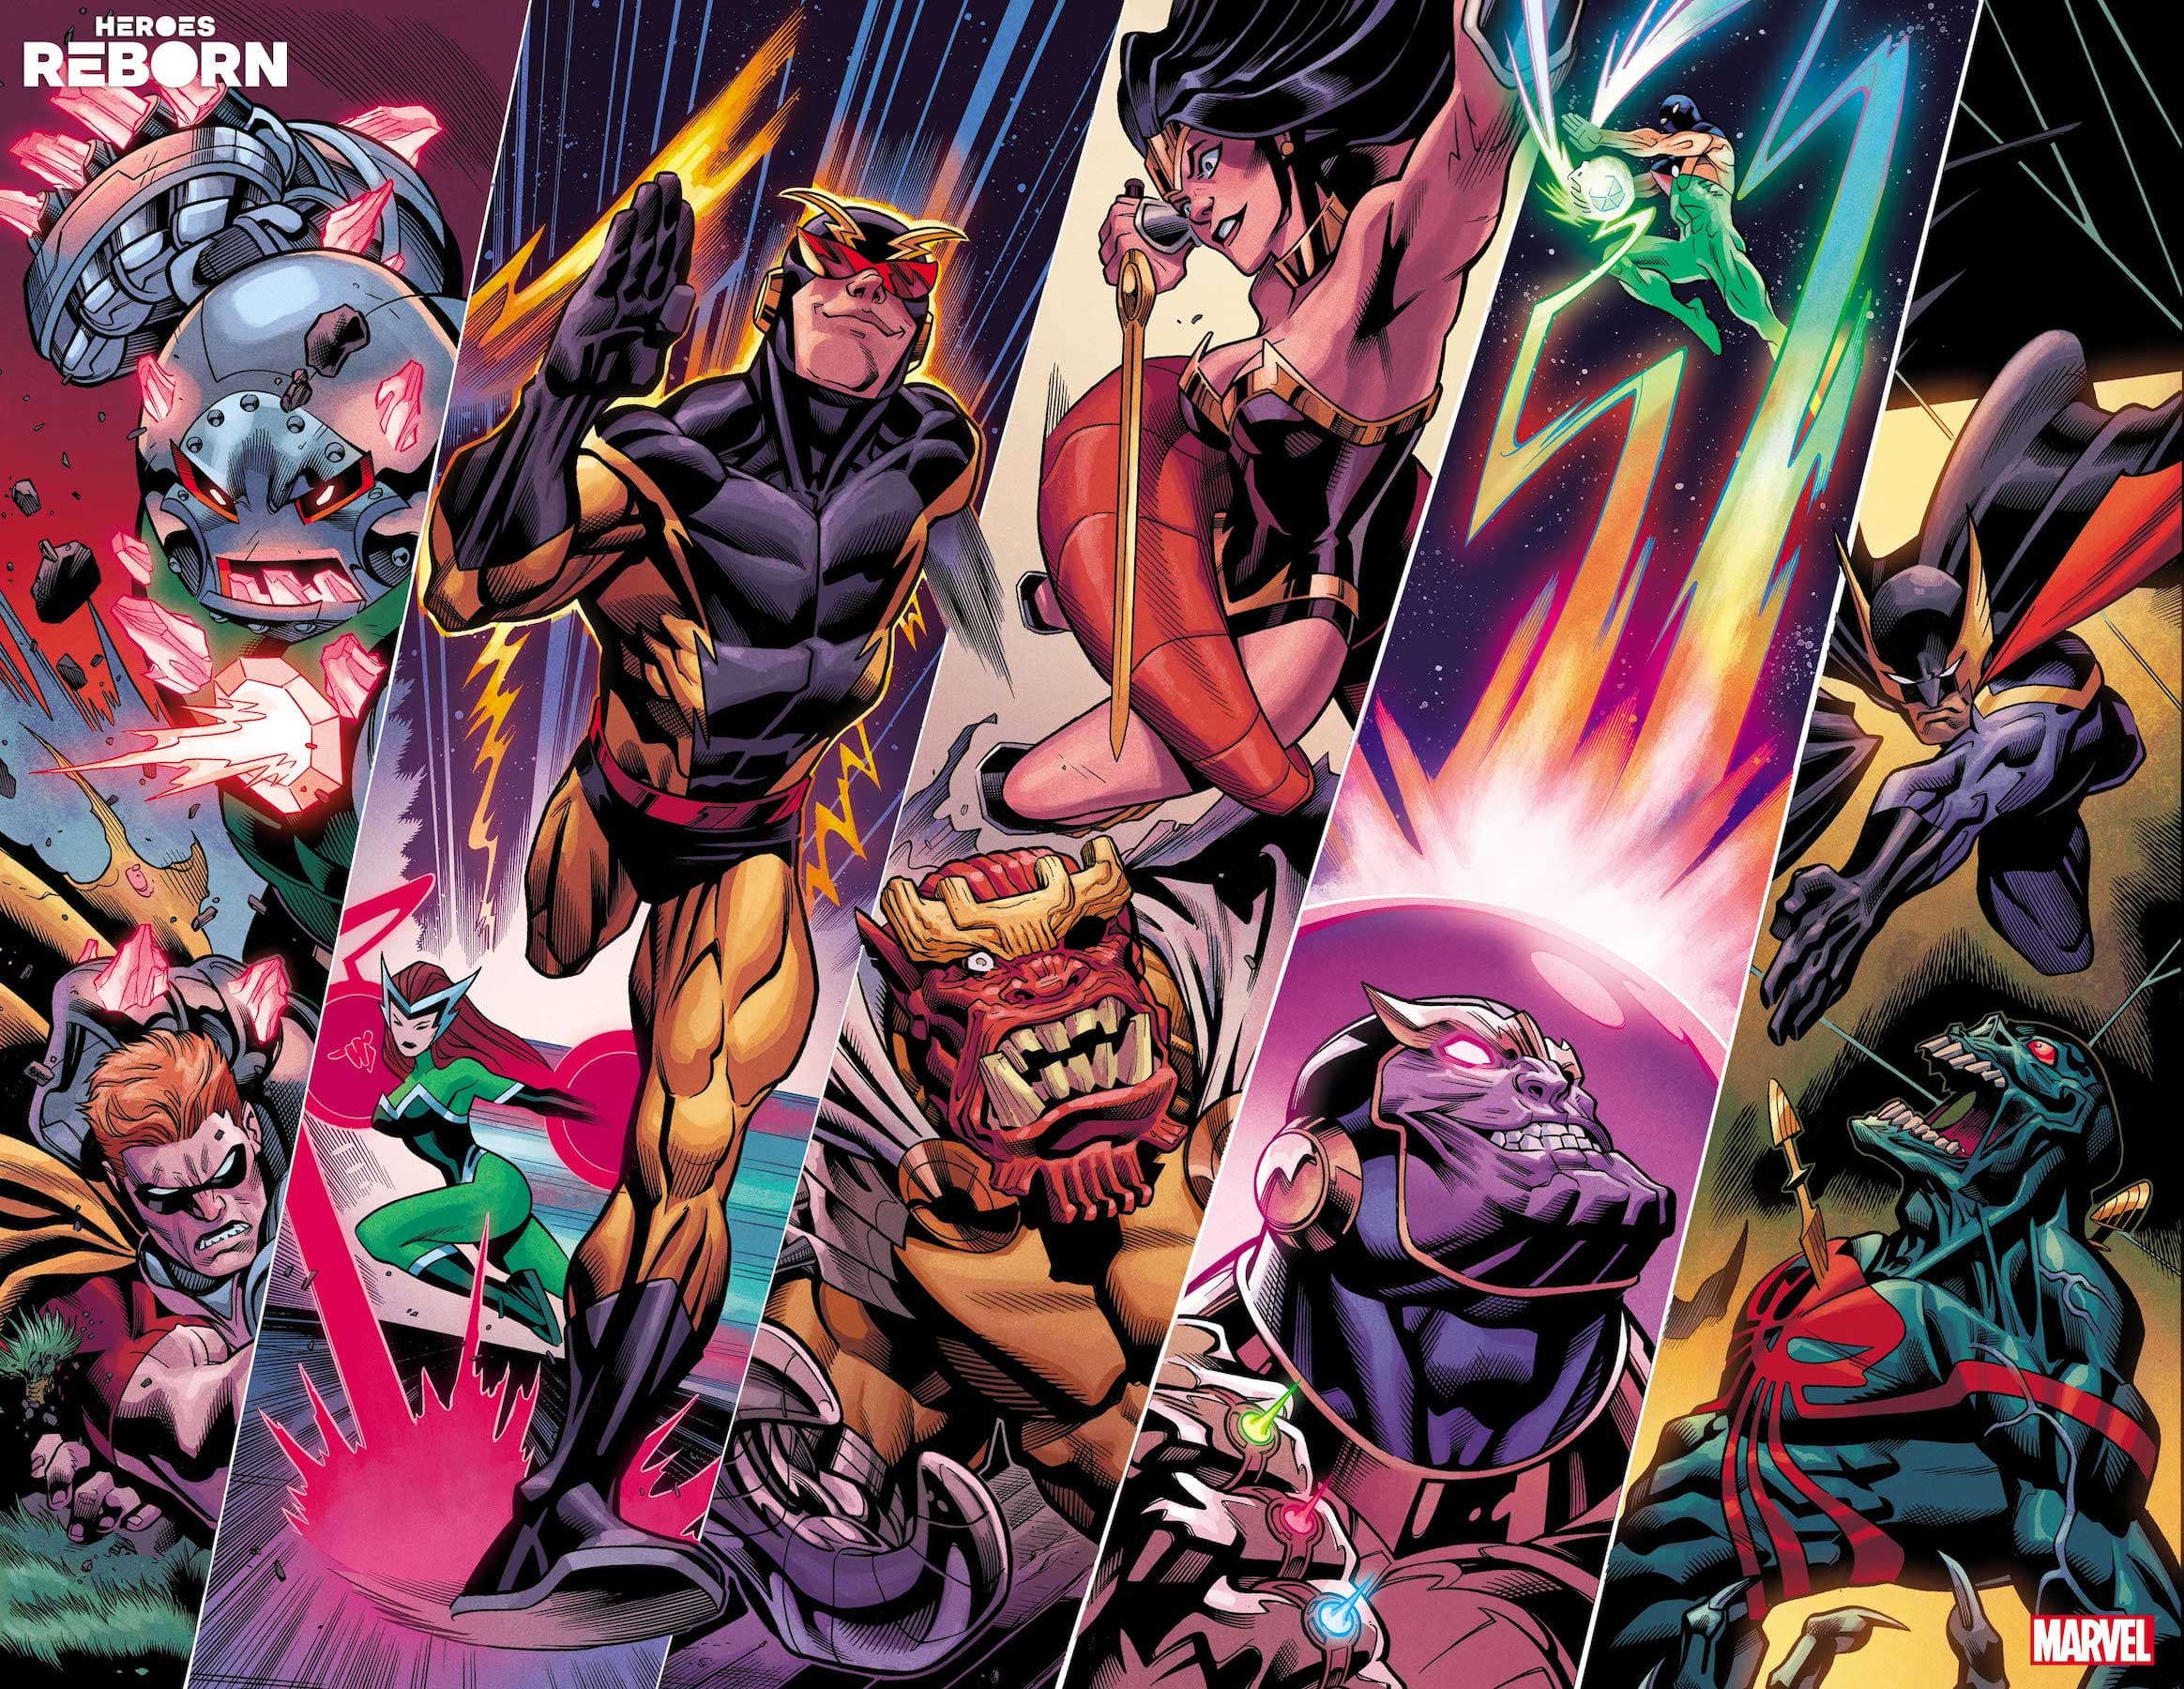 Our First Glimpse Of The Heroes Reborn Marvel Comics Characters